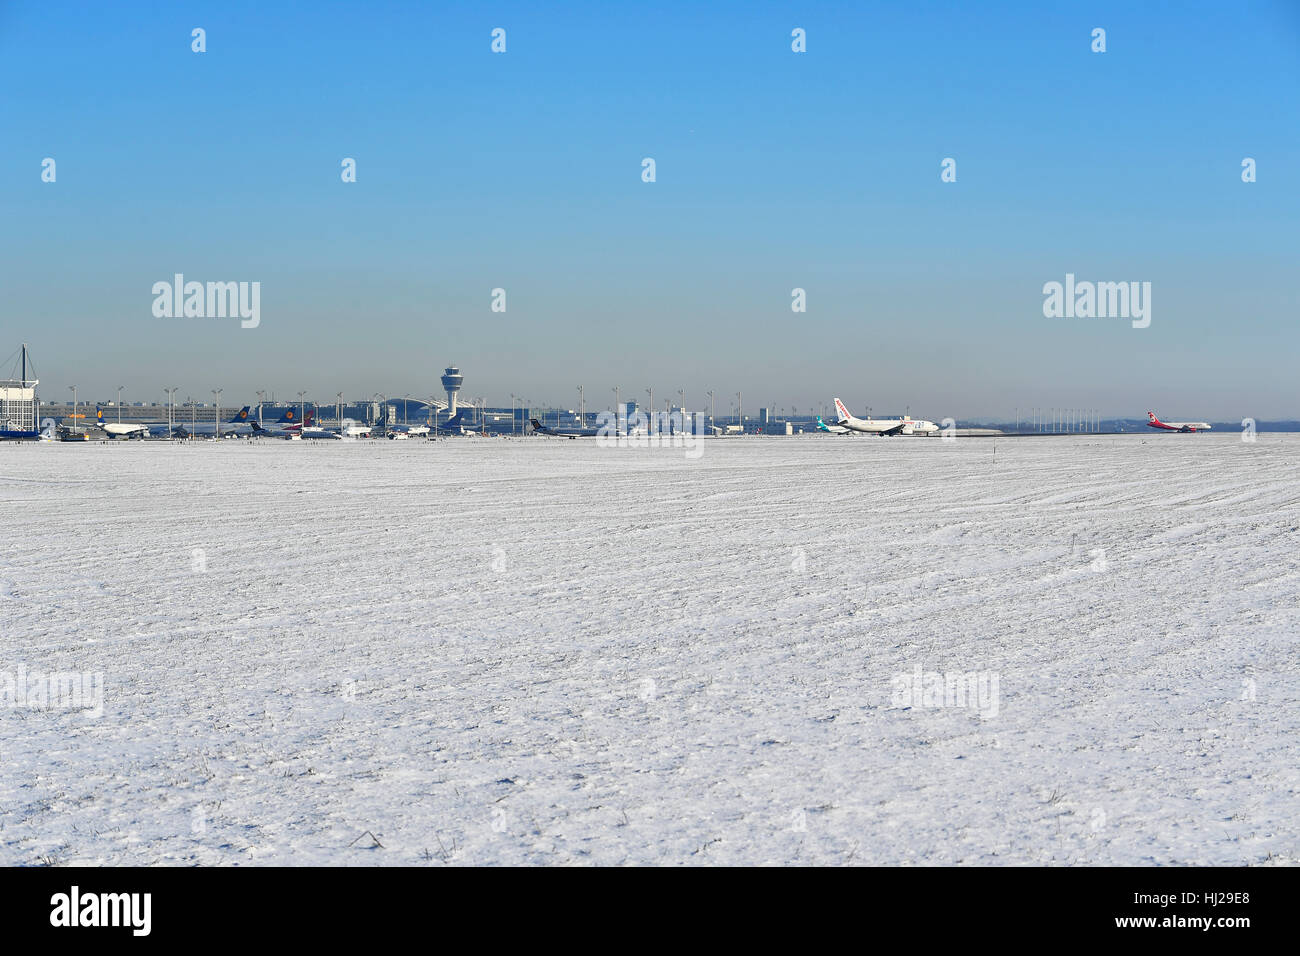 aircraft, a/c, airplane, plane, airlines, tower, terminal, air traffic, overview, view, MUC, Airport Munich, Bavaria, Germany, Stock Photo